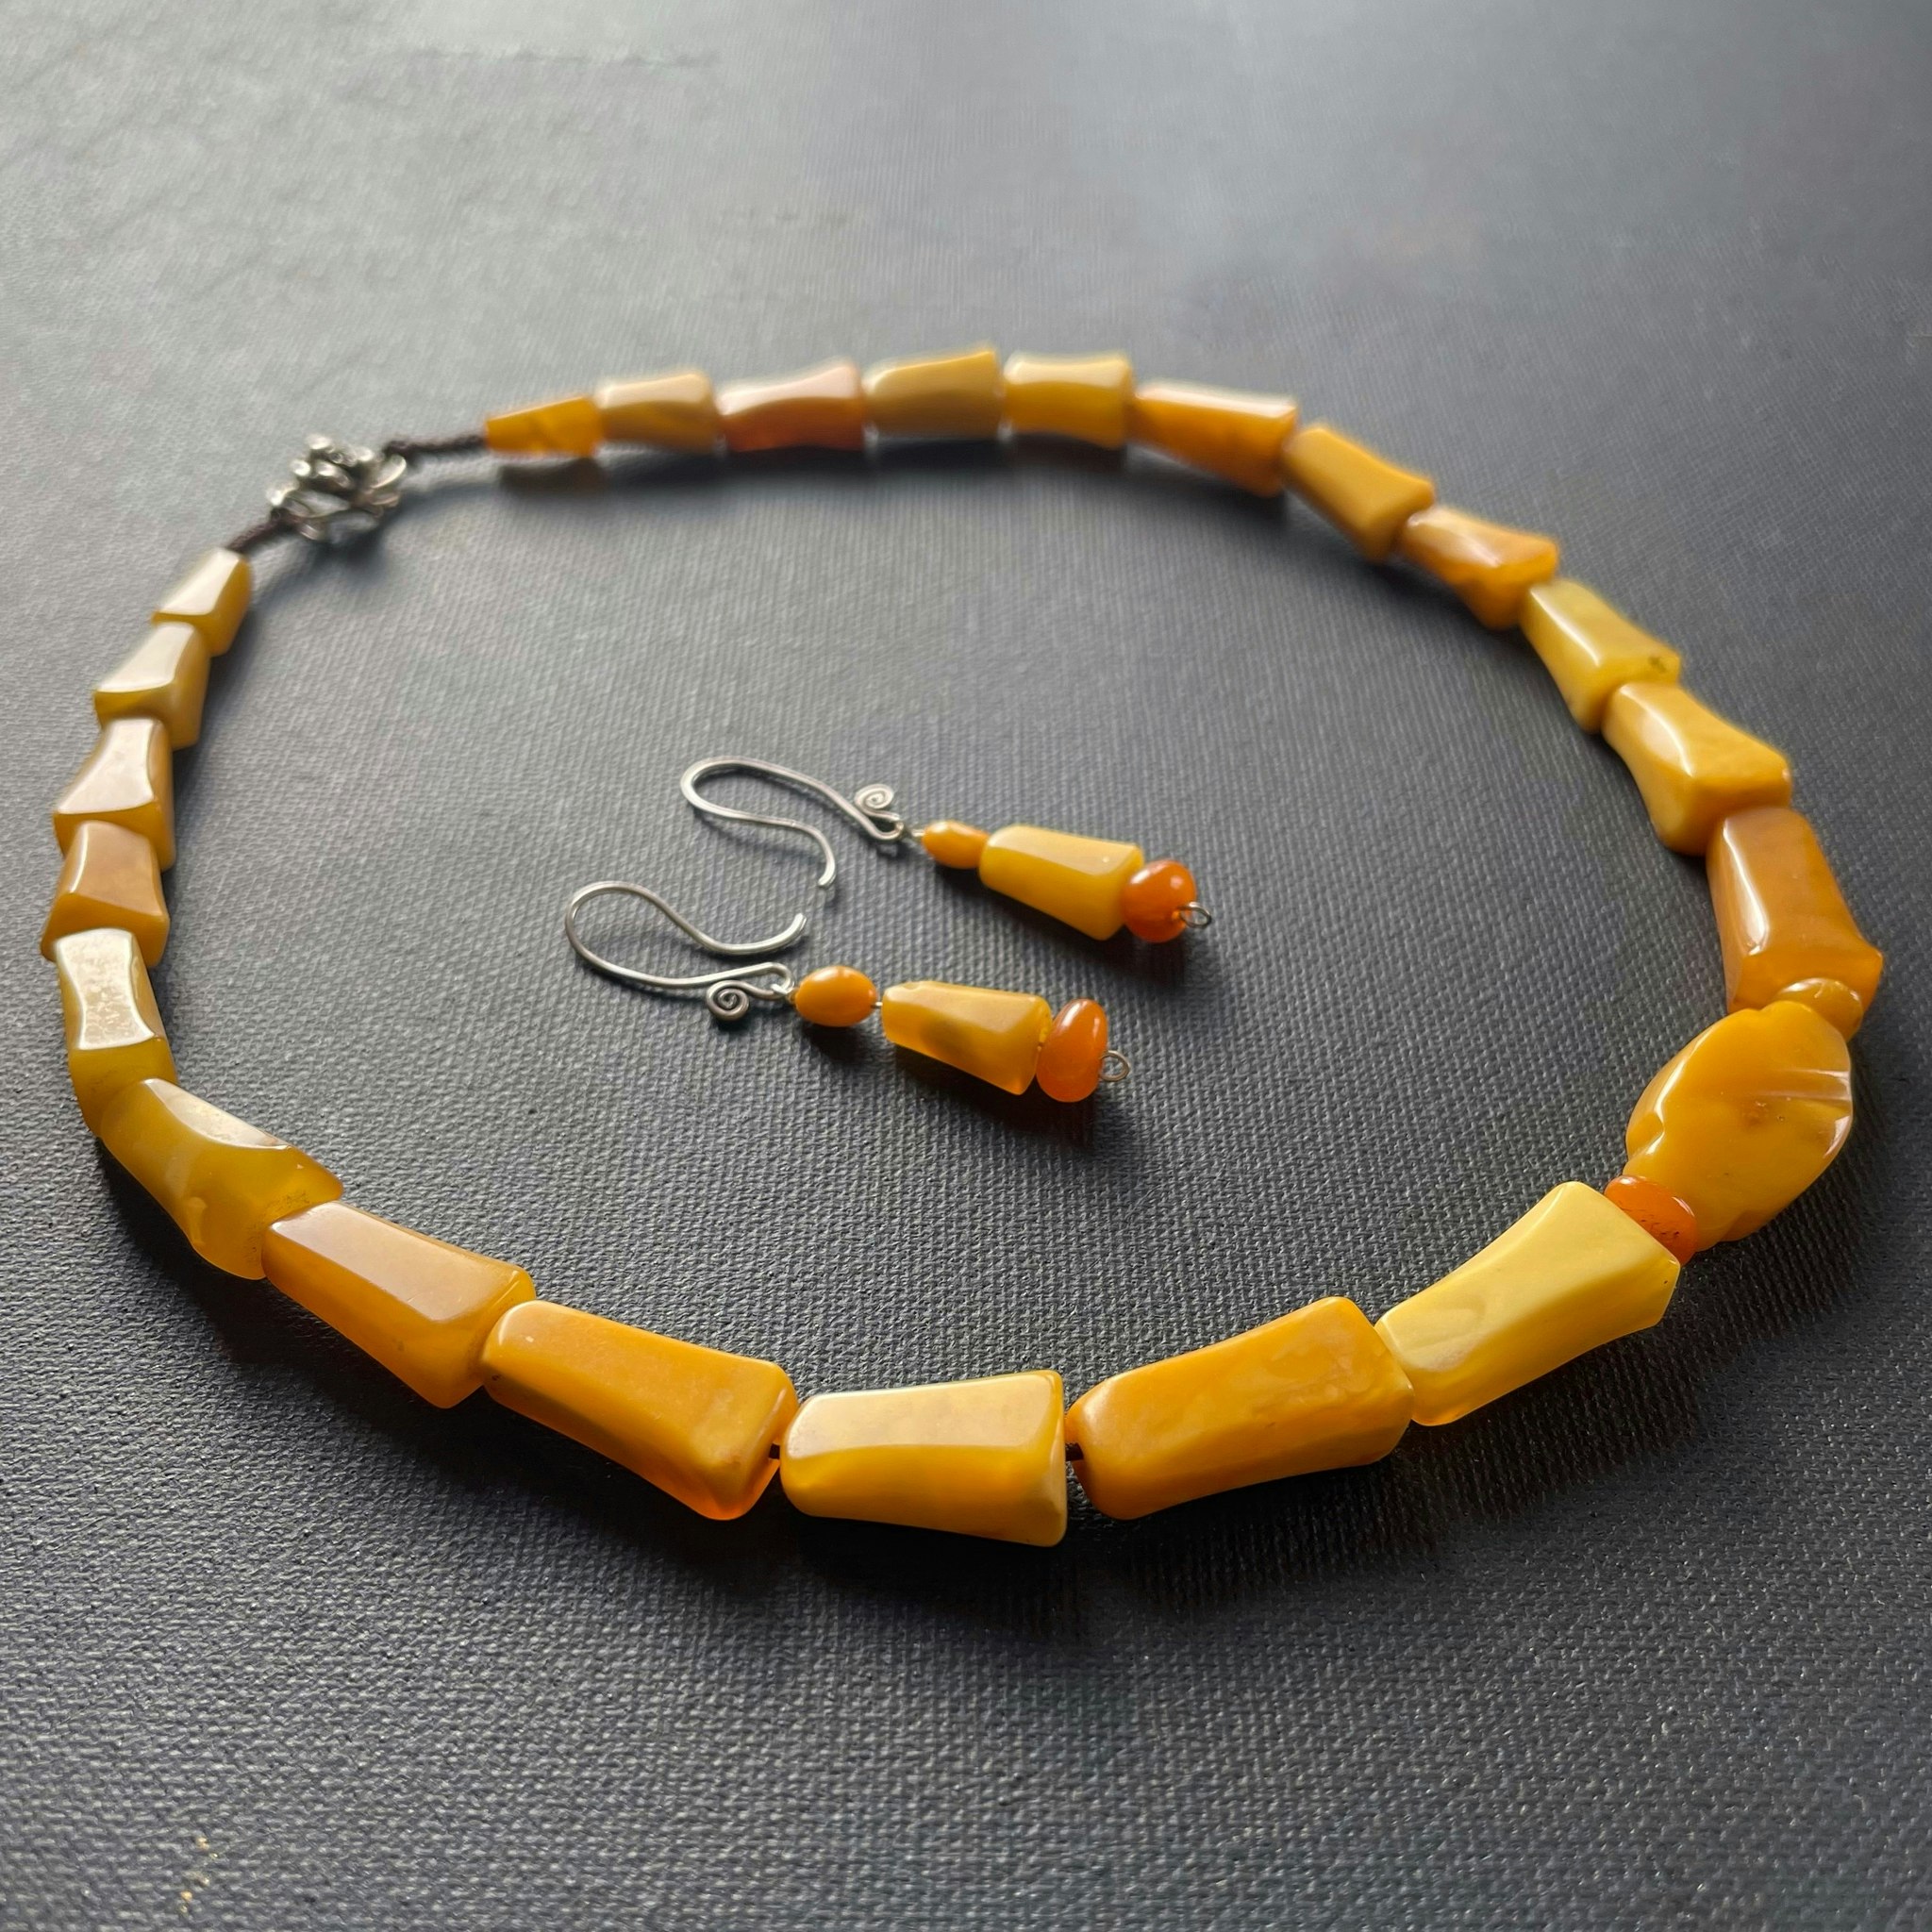 Unique Design Natural Amber Necklace and earrings Egg Yolk Butterscotch #1859